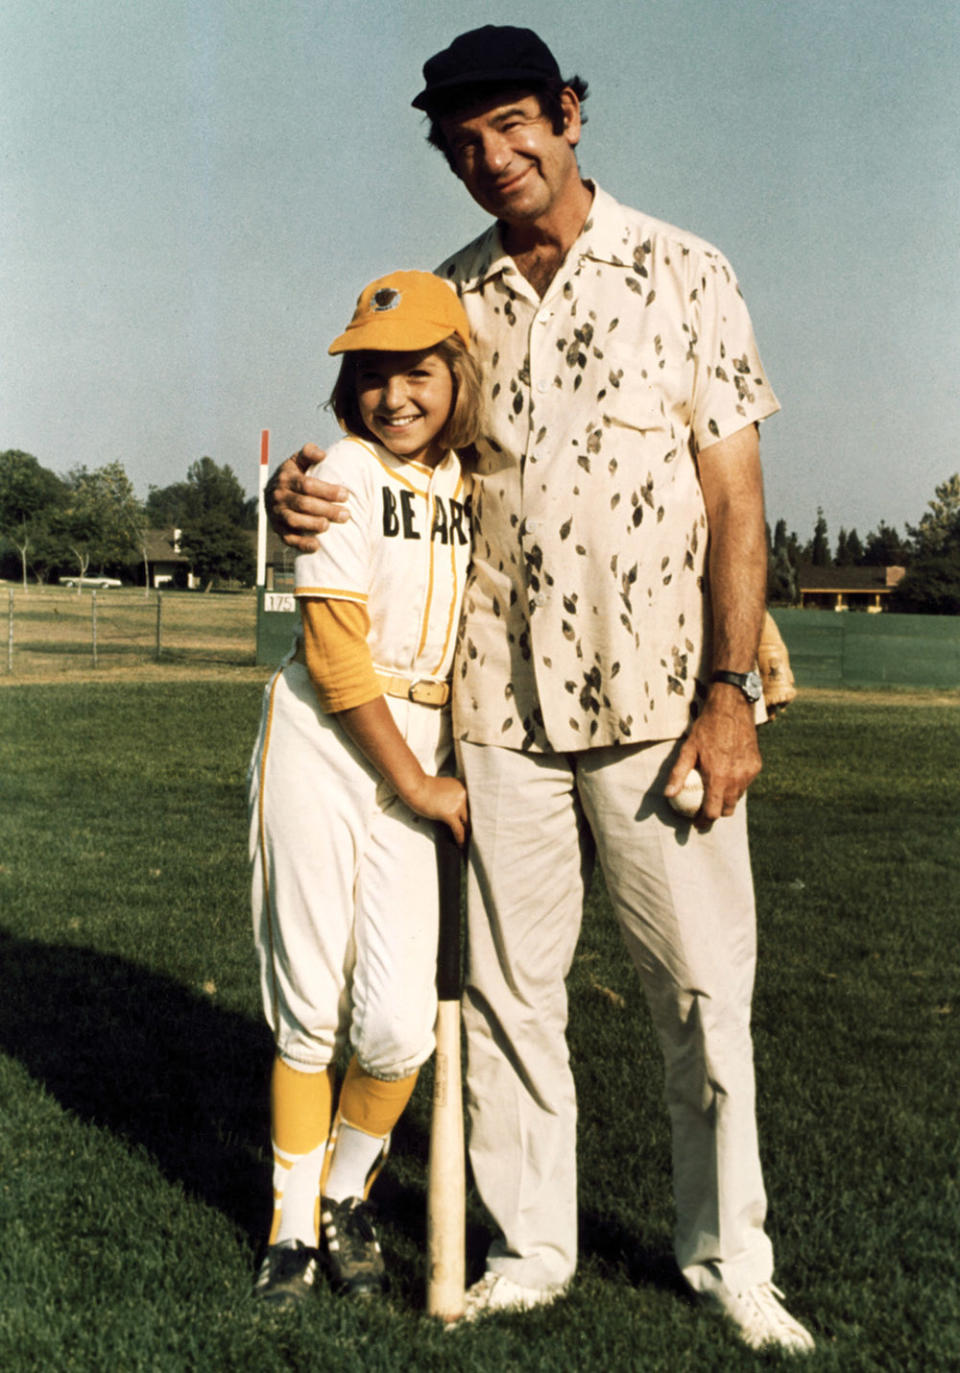 O’Neal went on to star in 1976’s The Bad News Bears with Walter Matthau.